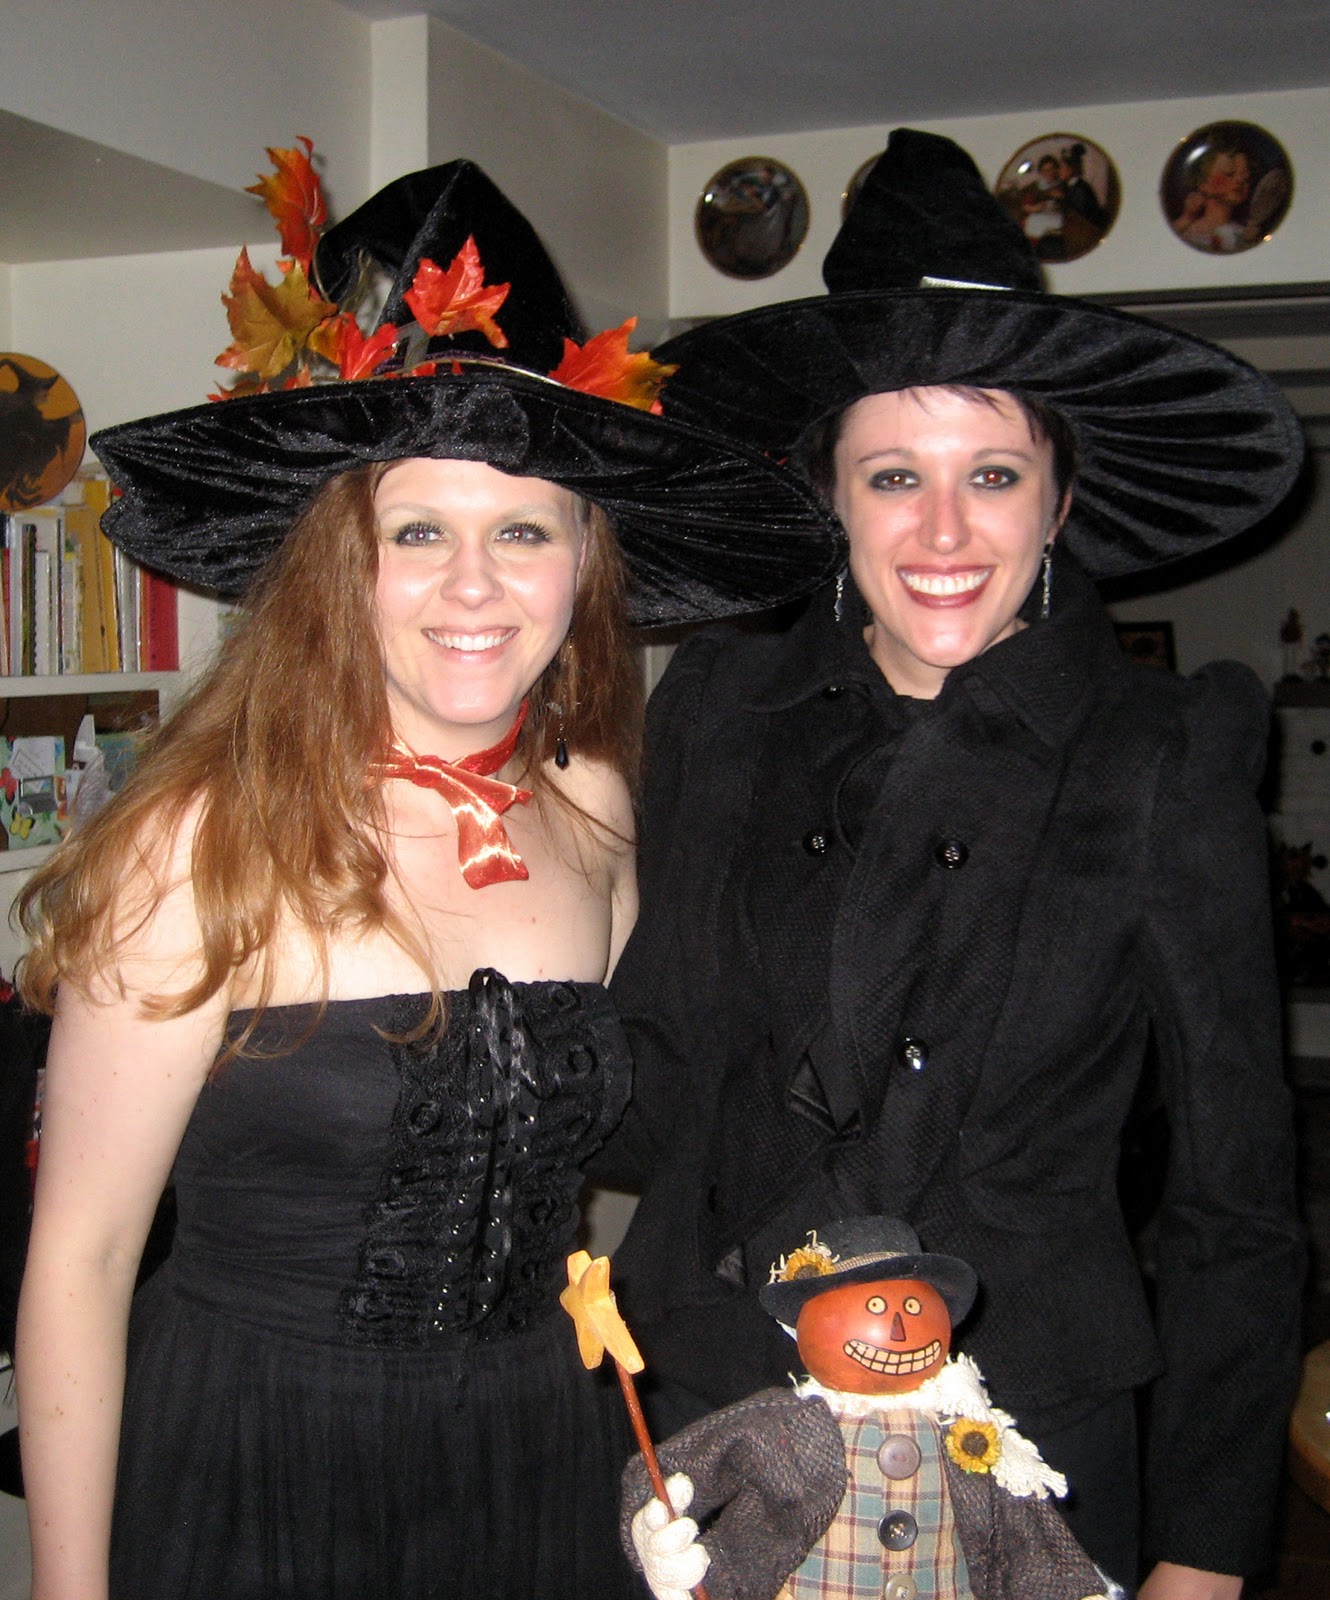 Justine's Halloween: Welcome to the witch party!